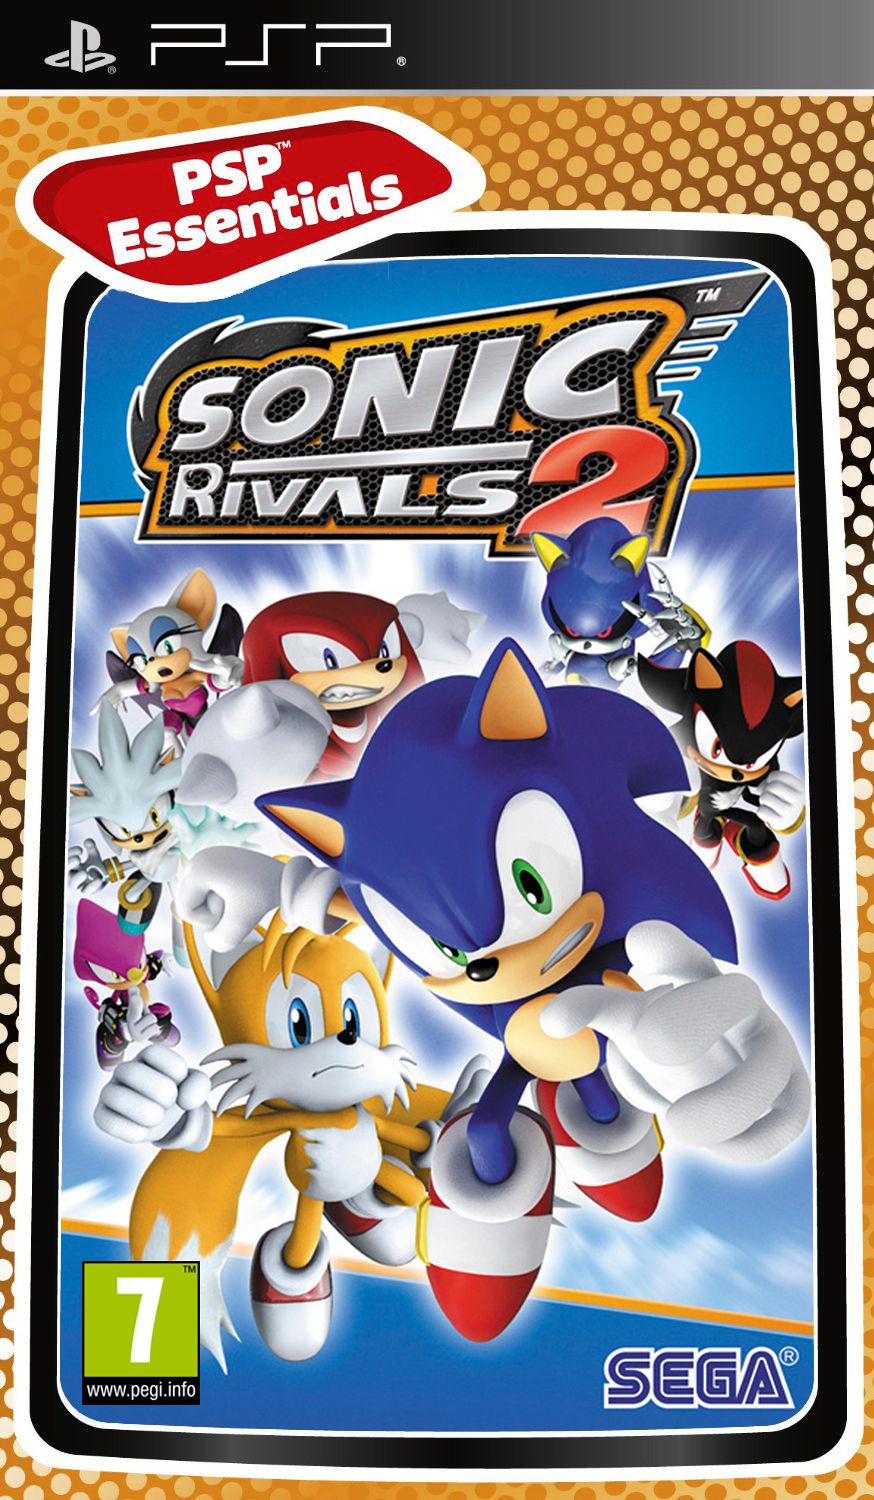 Sonic Rivals 2 - Essentials (PSP) | PlayStation Portable